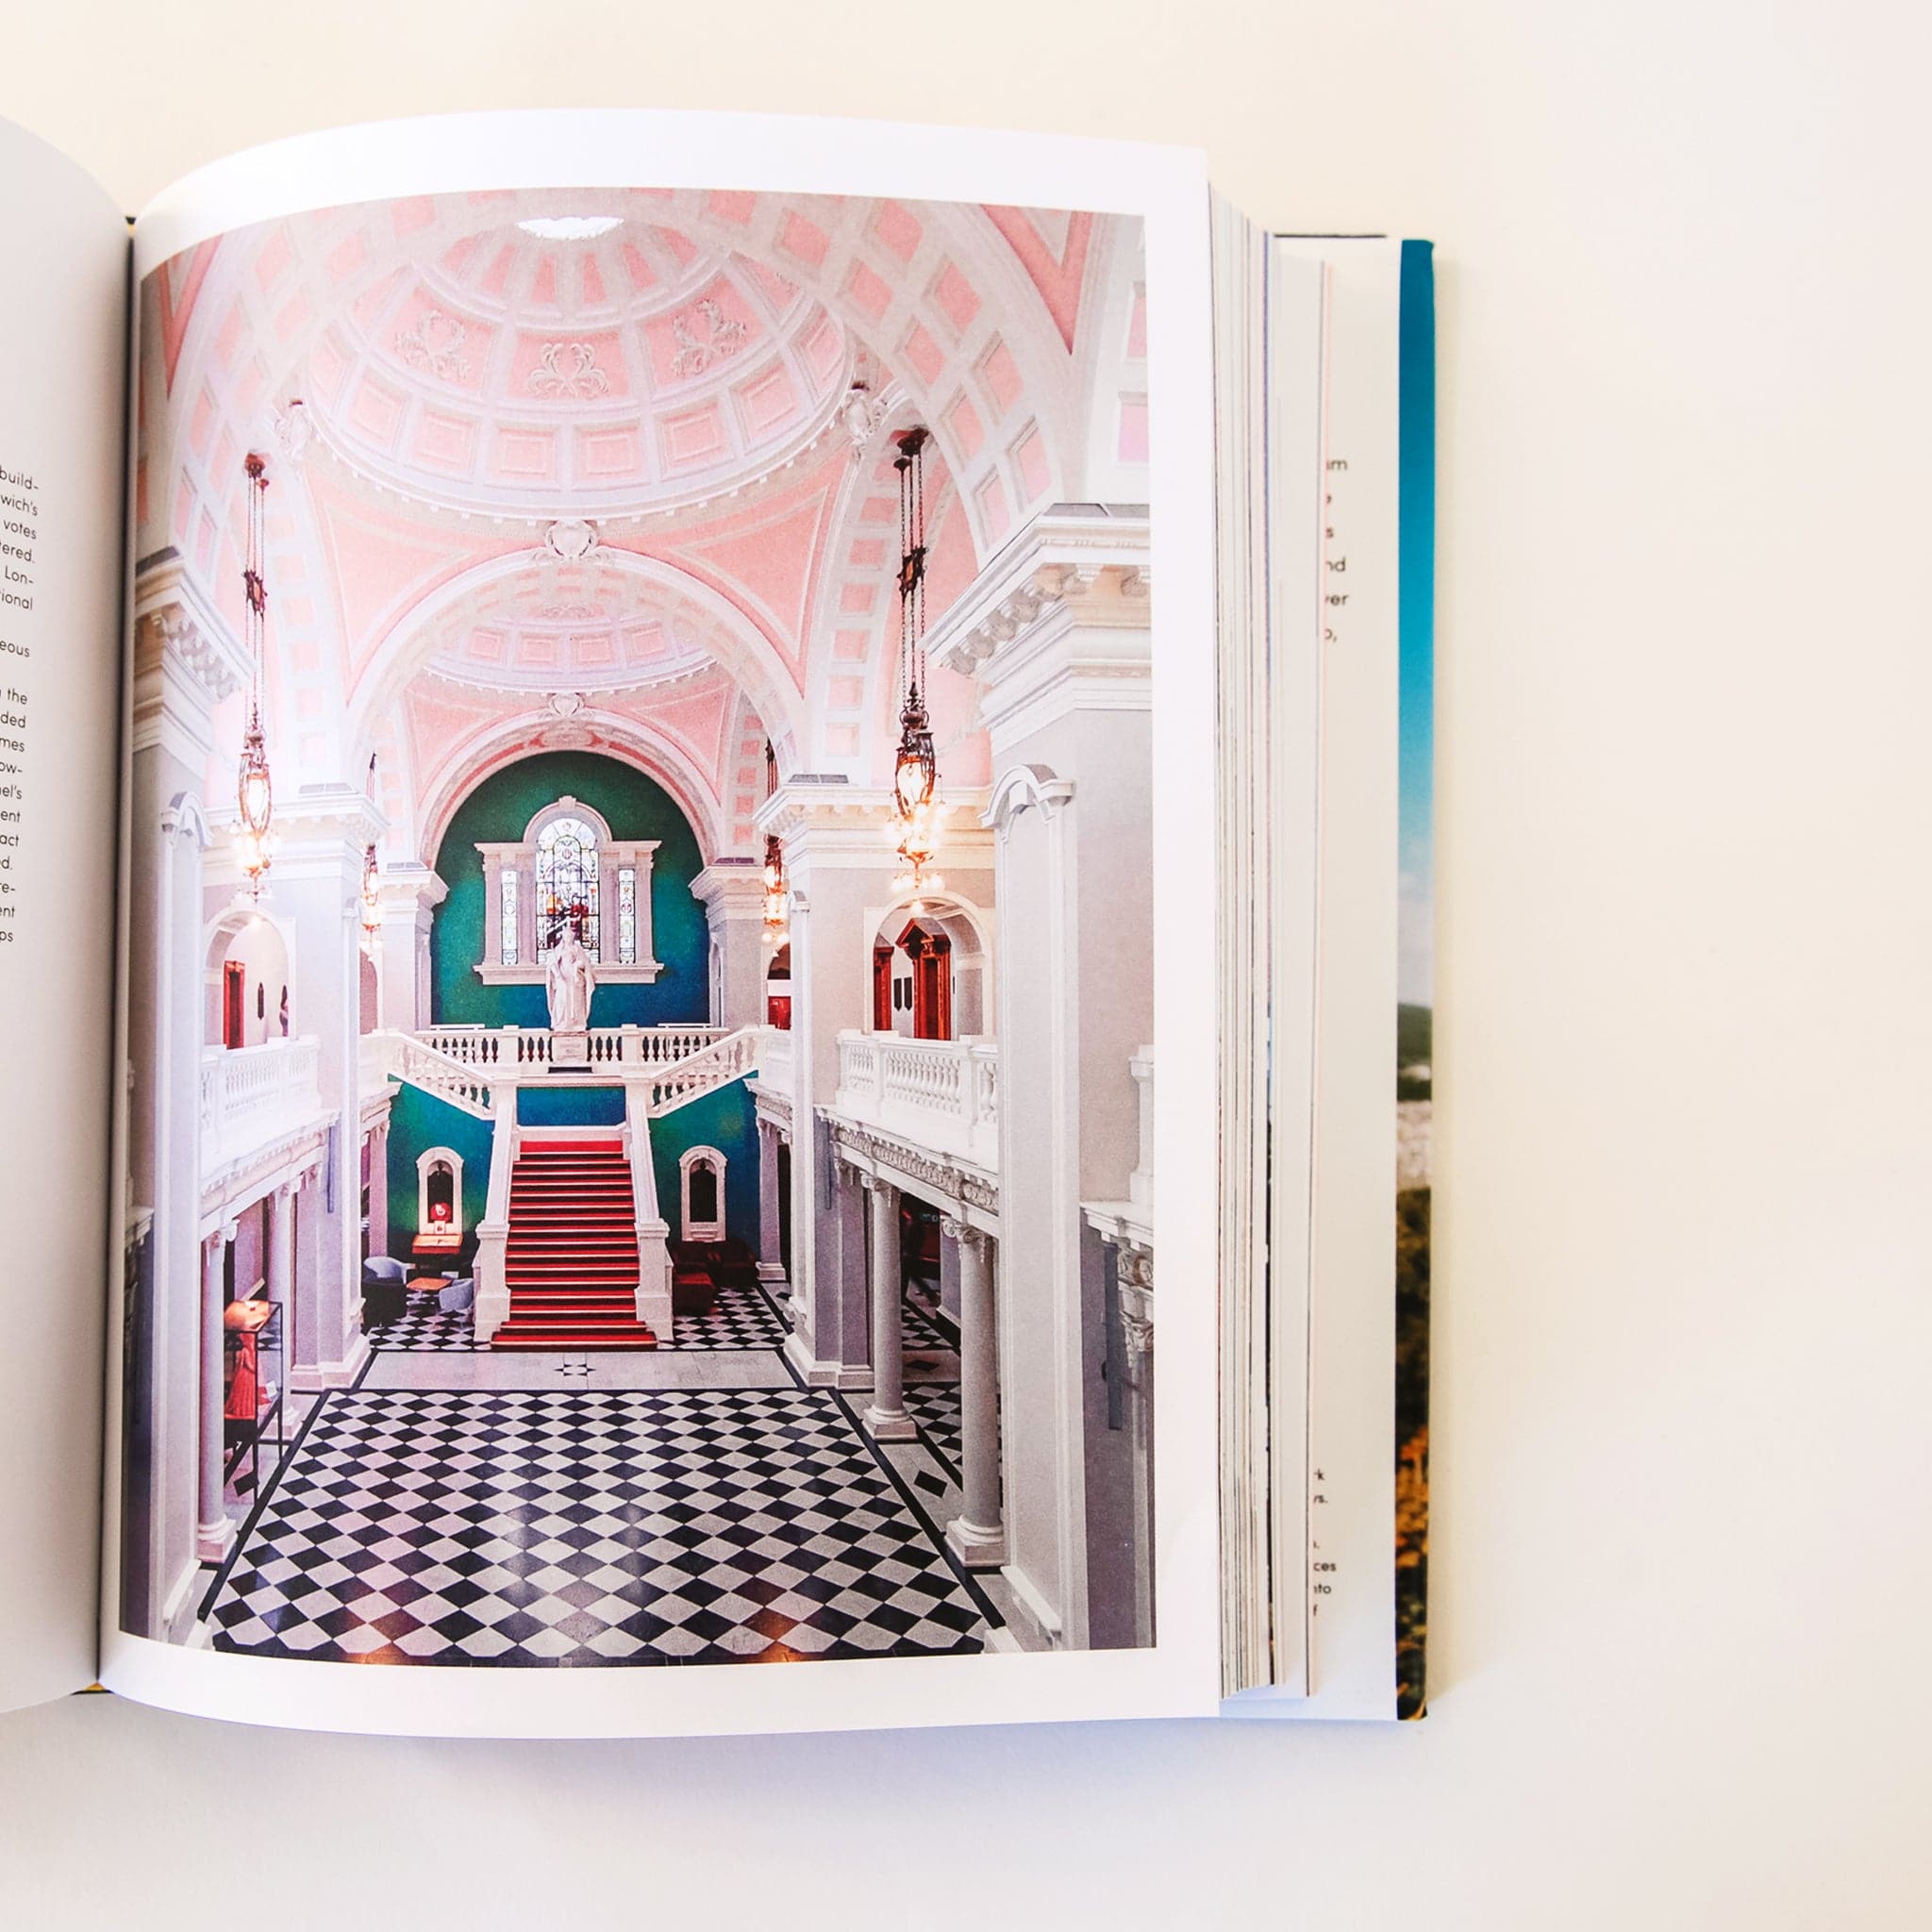 The Accidentally Wes Anderson book opened to a page featuring a large victorian style room with checker floors, high ceilings, and crown molding. 